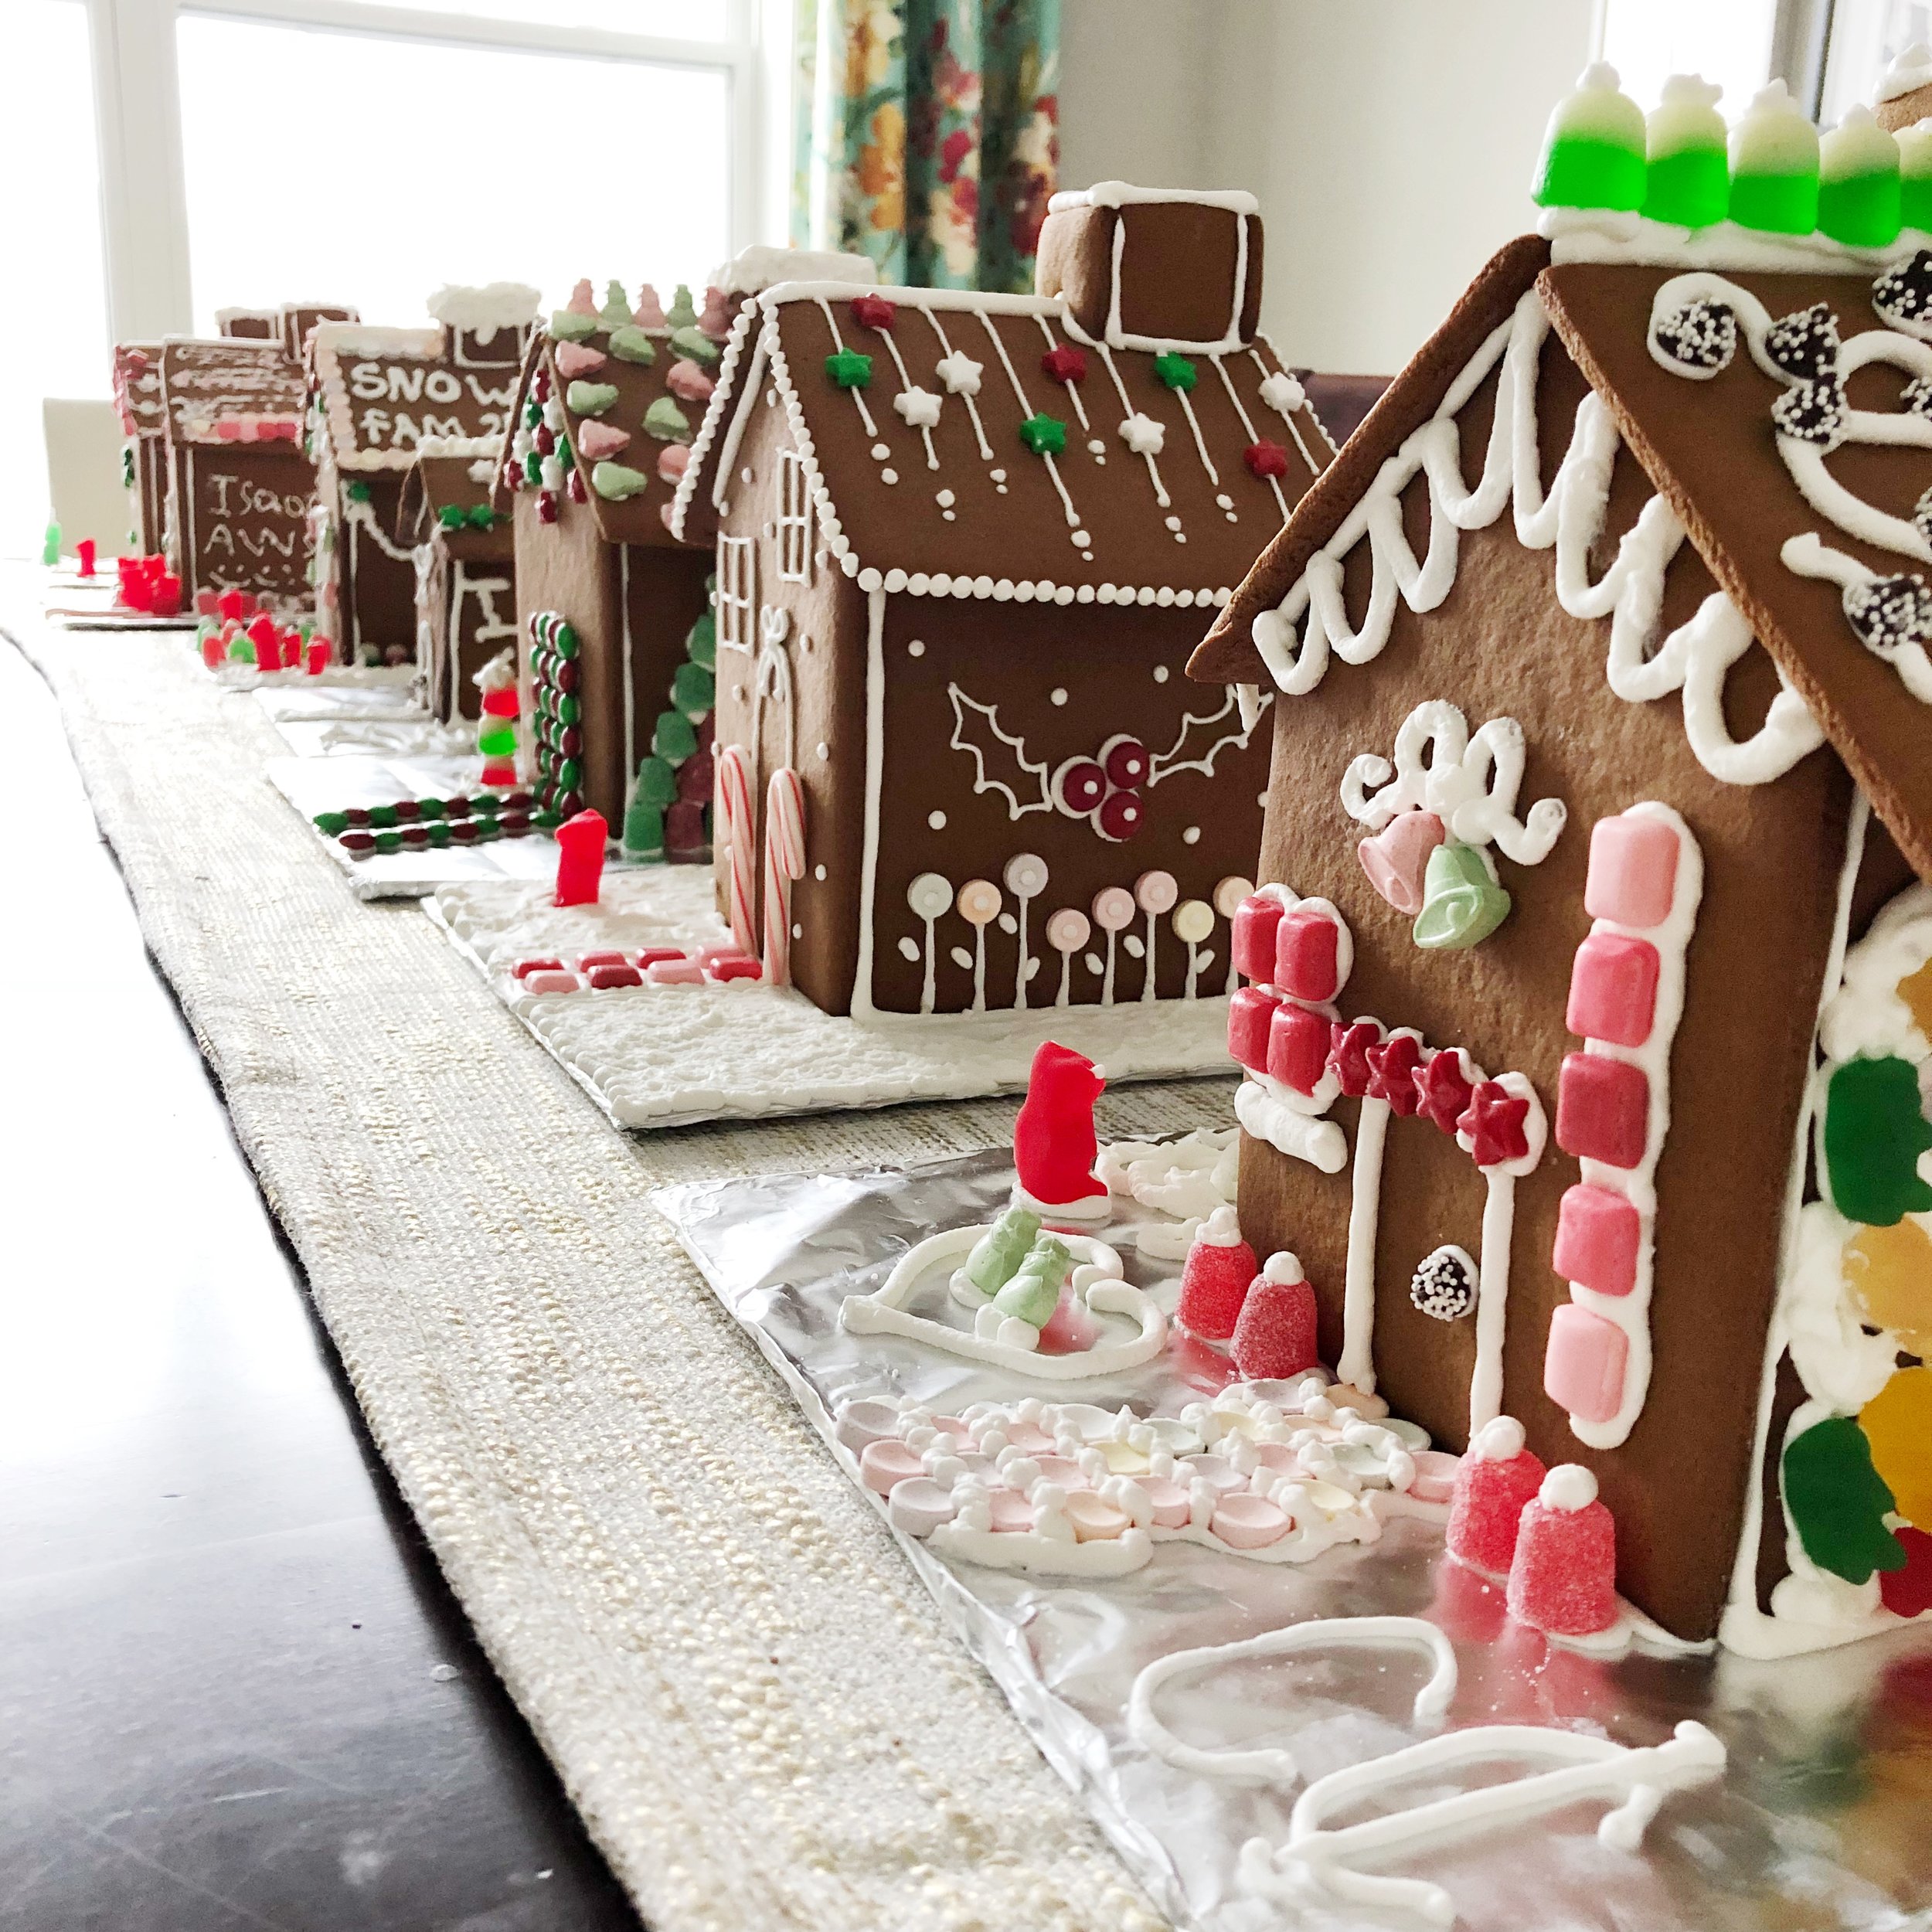 How to make a gingerbread house from scratch. Free template and recipe to create your very own gingerbread house.